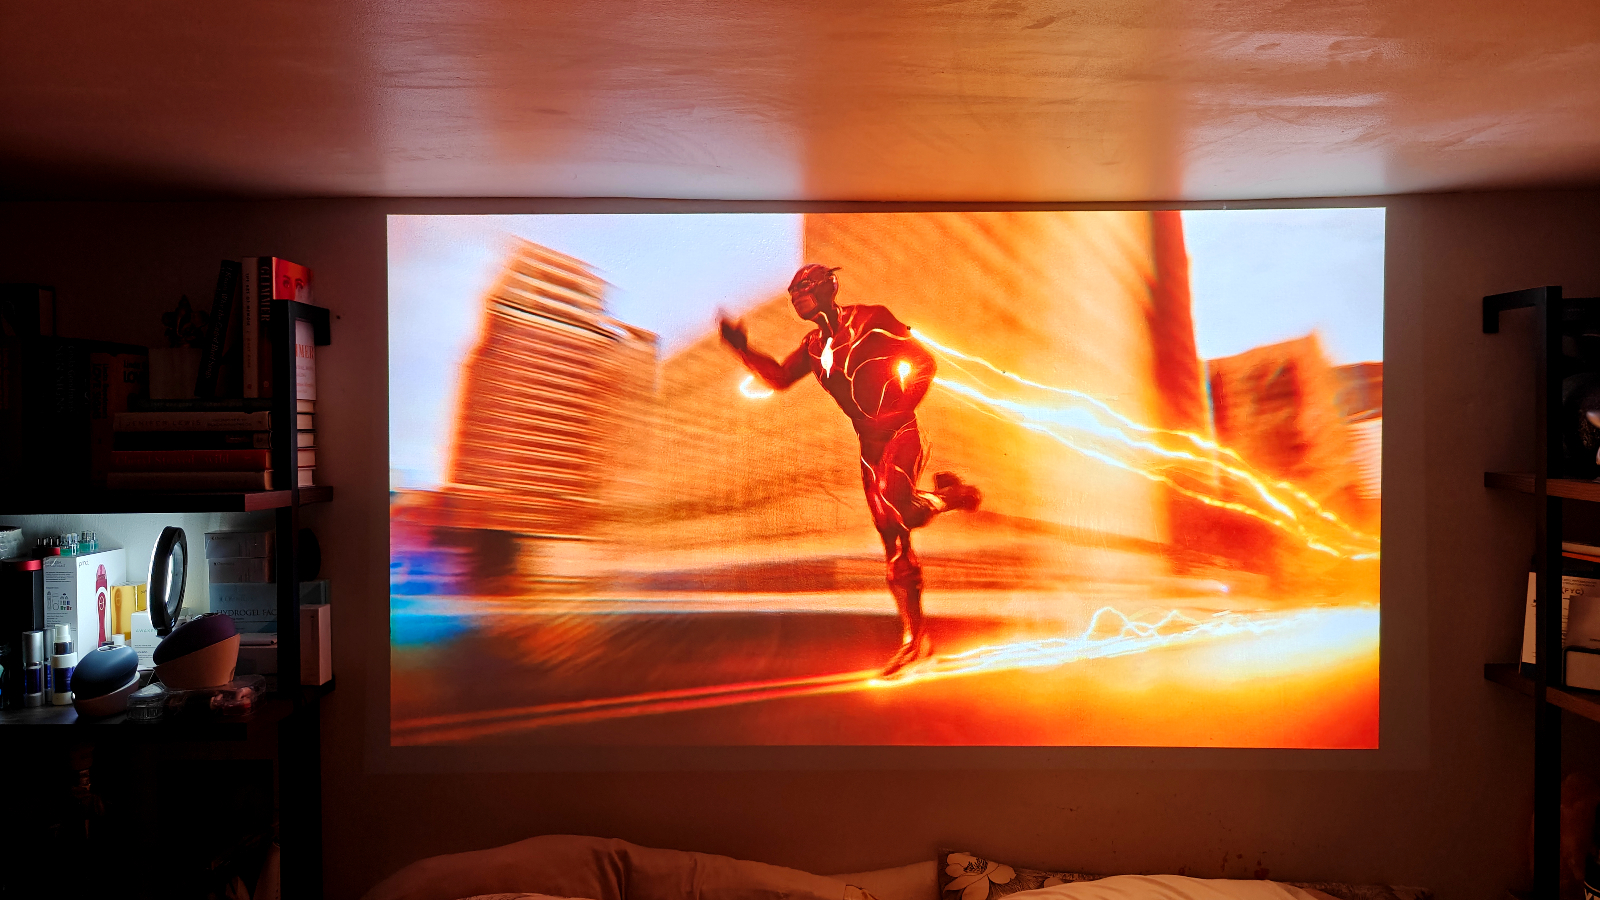 XGIMI Horizon Ultra 4K Projector Review